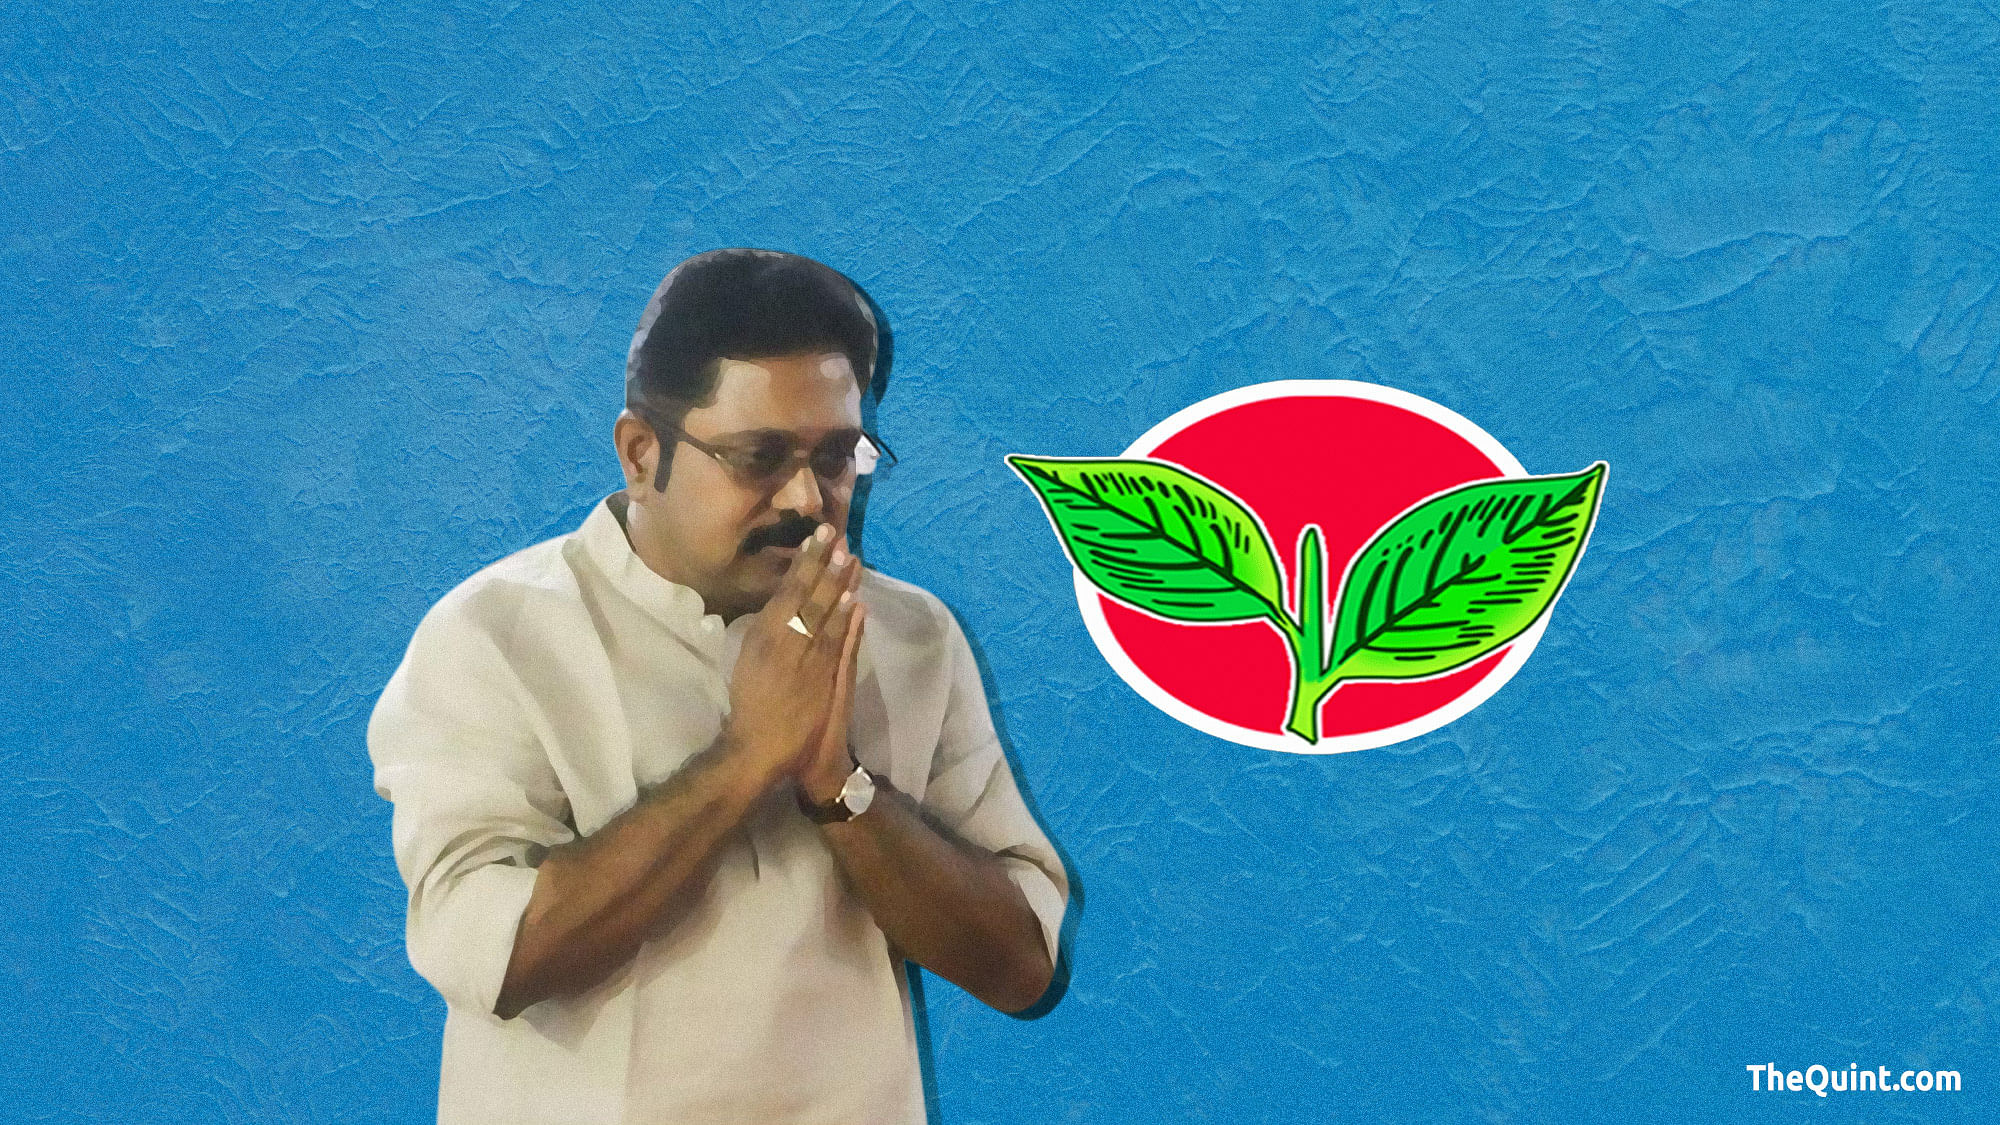 Though Dhinakaran has lost the battle of the symbol, it would be too early to write his political obituary.